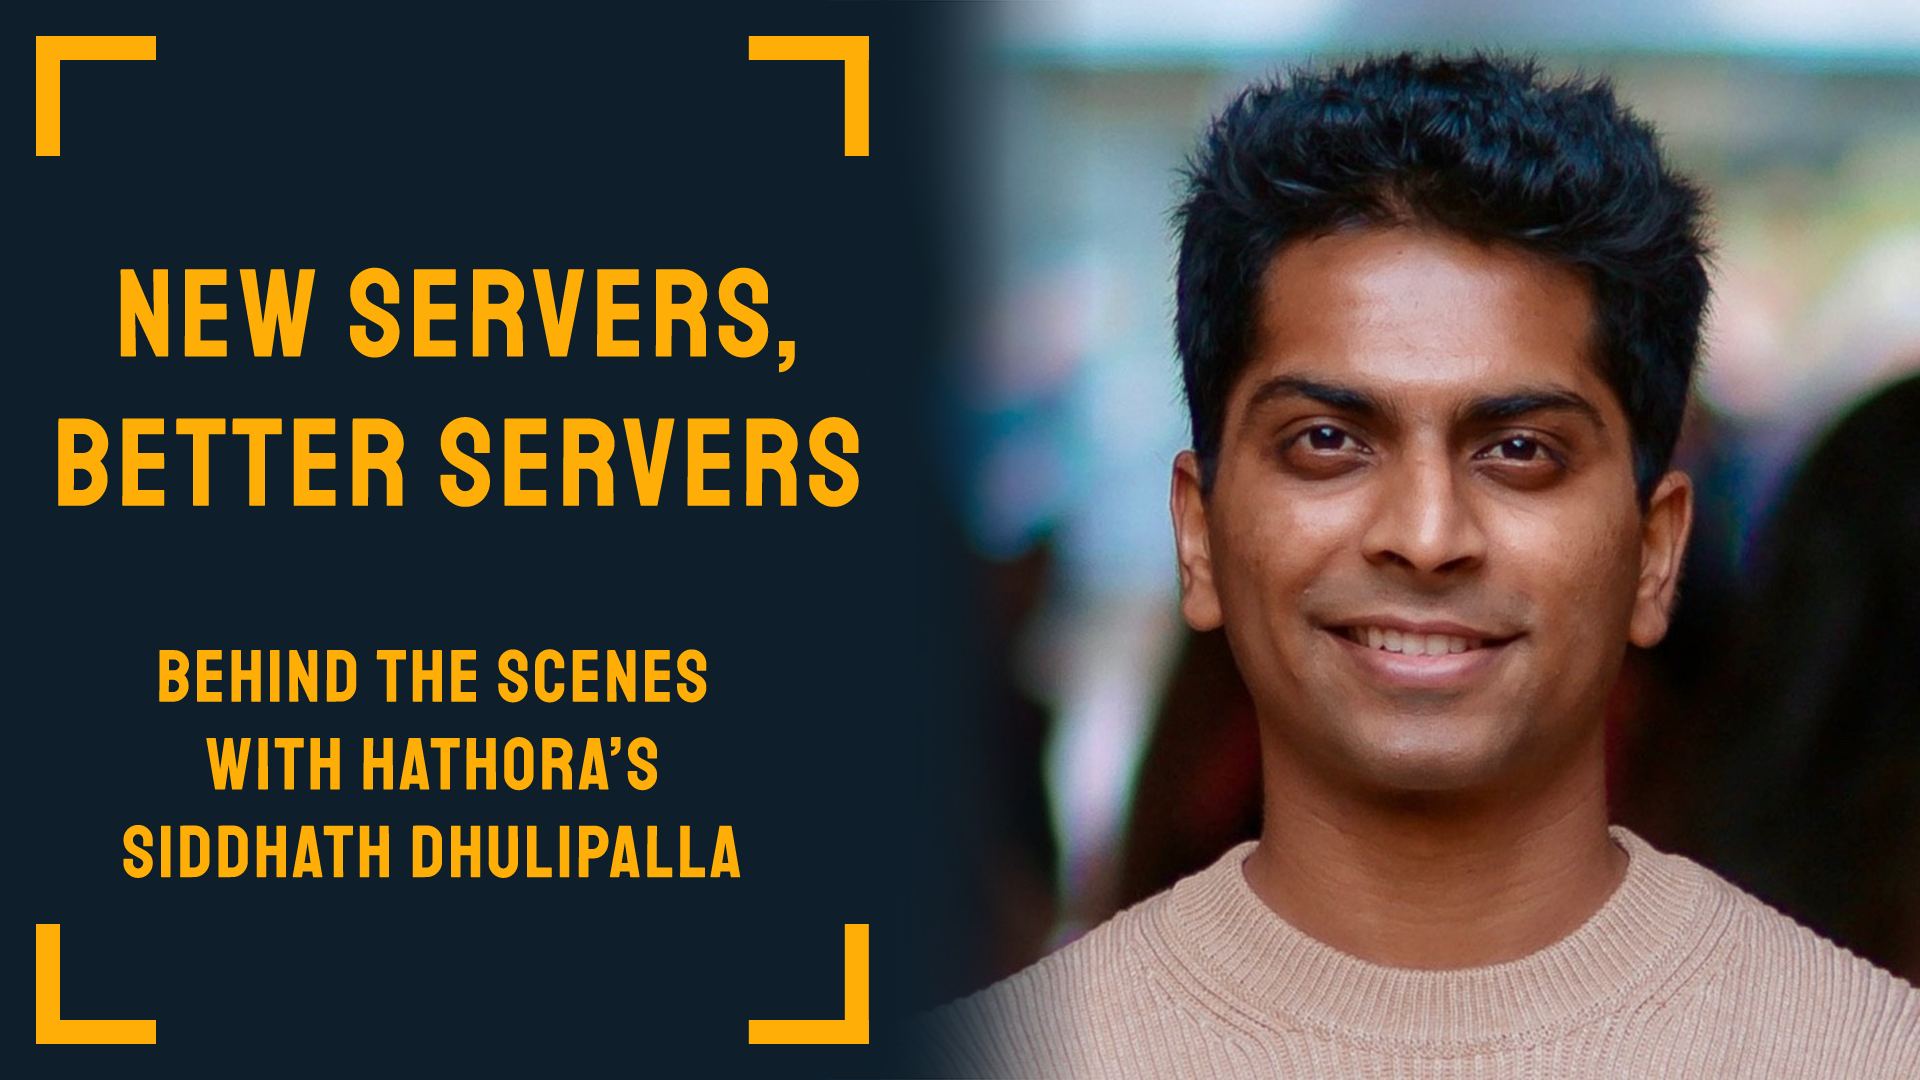 New Servers, Better Servers: Behind the Scenes with Hathora